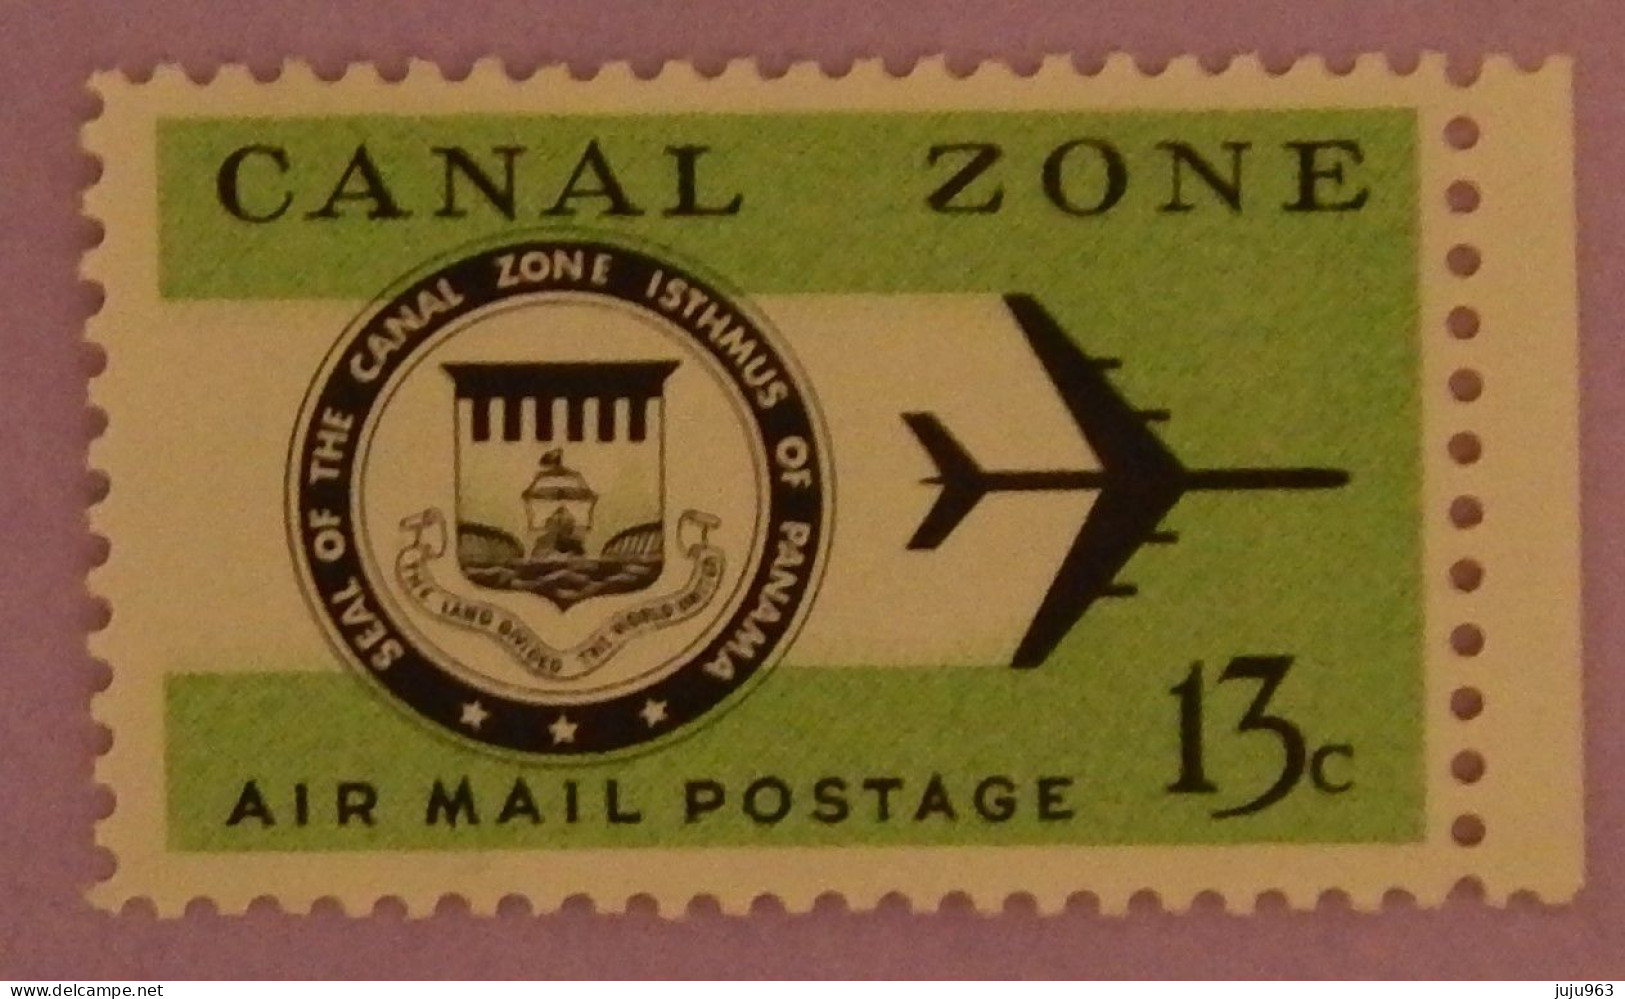 CANAL ZONE SG 236 NEUF**MNH  ANNEE 1974 - Canal Zone